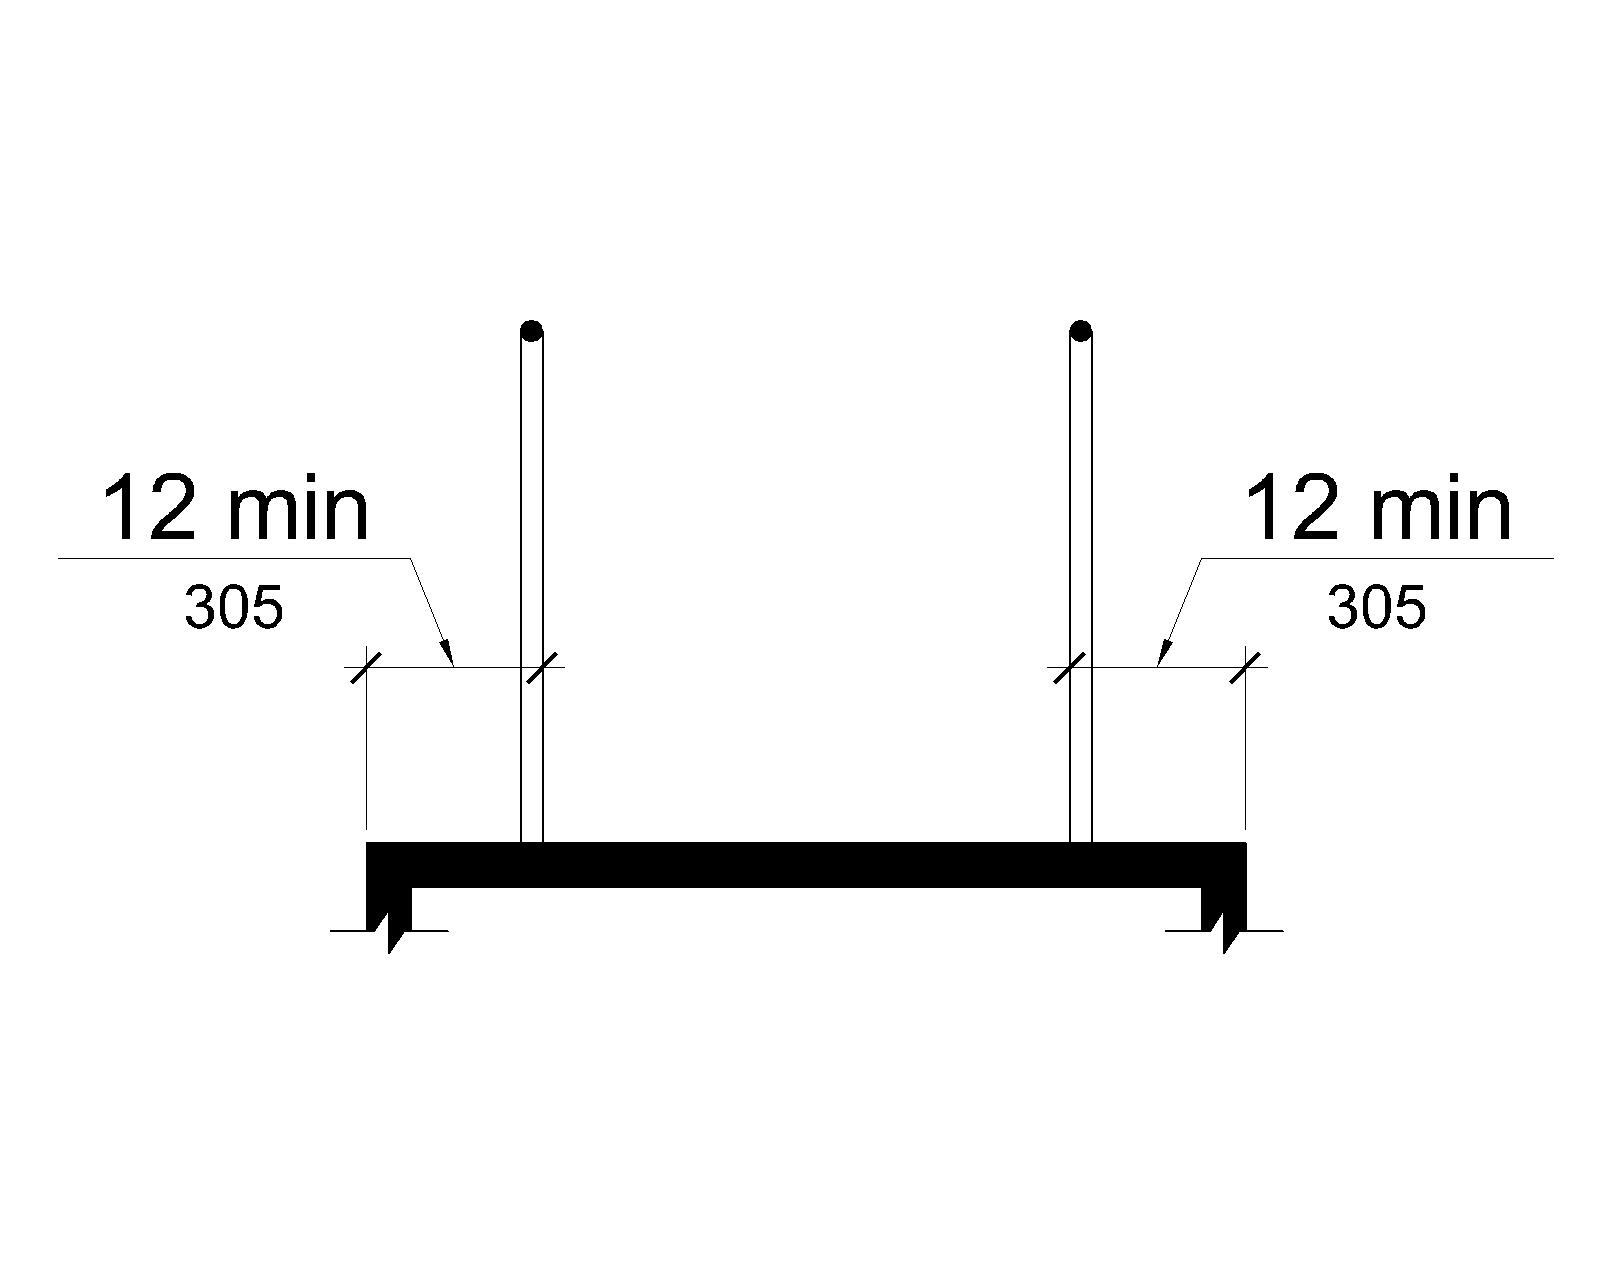 The cross section of a ramp with handrails is shown where the ramp surface extends 12 inches (305 mm) minimum to the outside of the handrails.